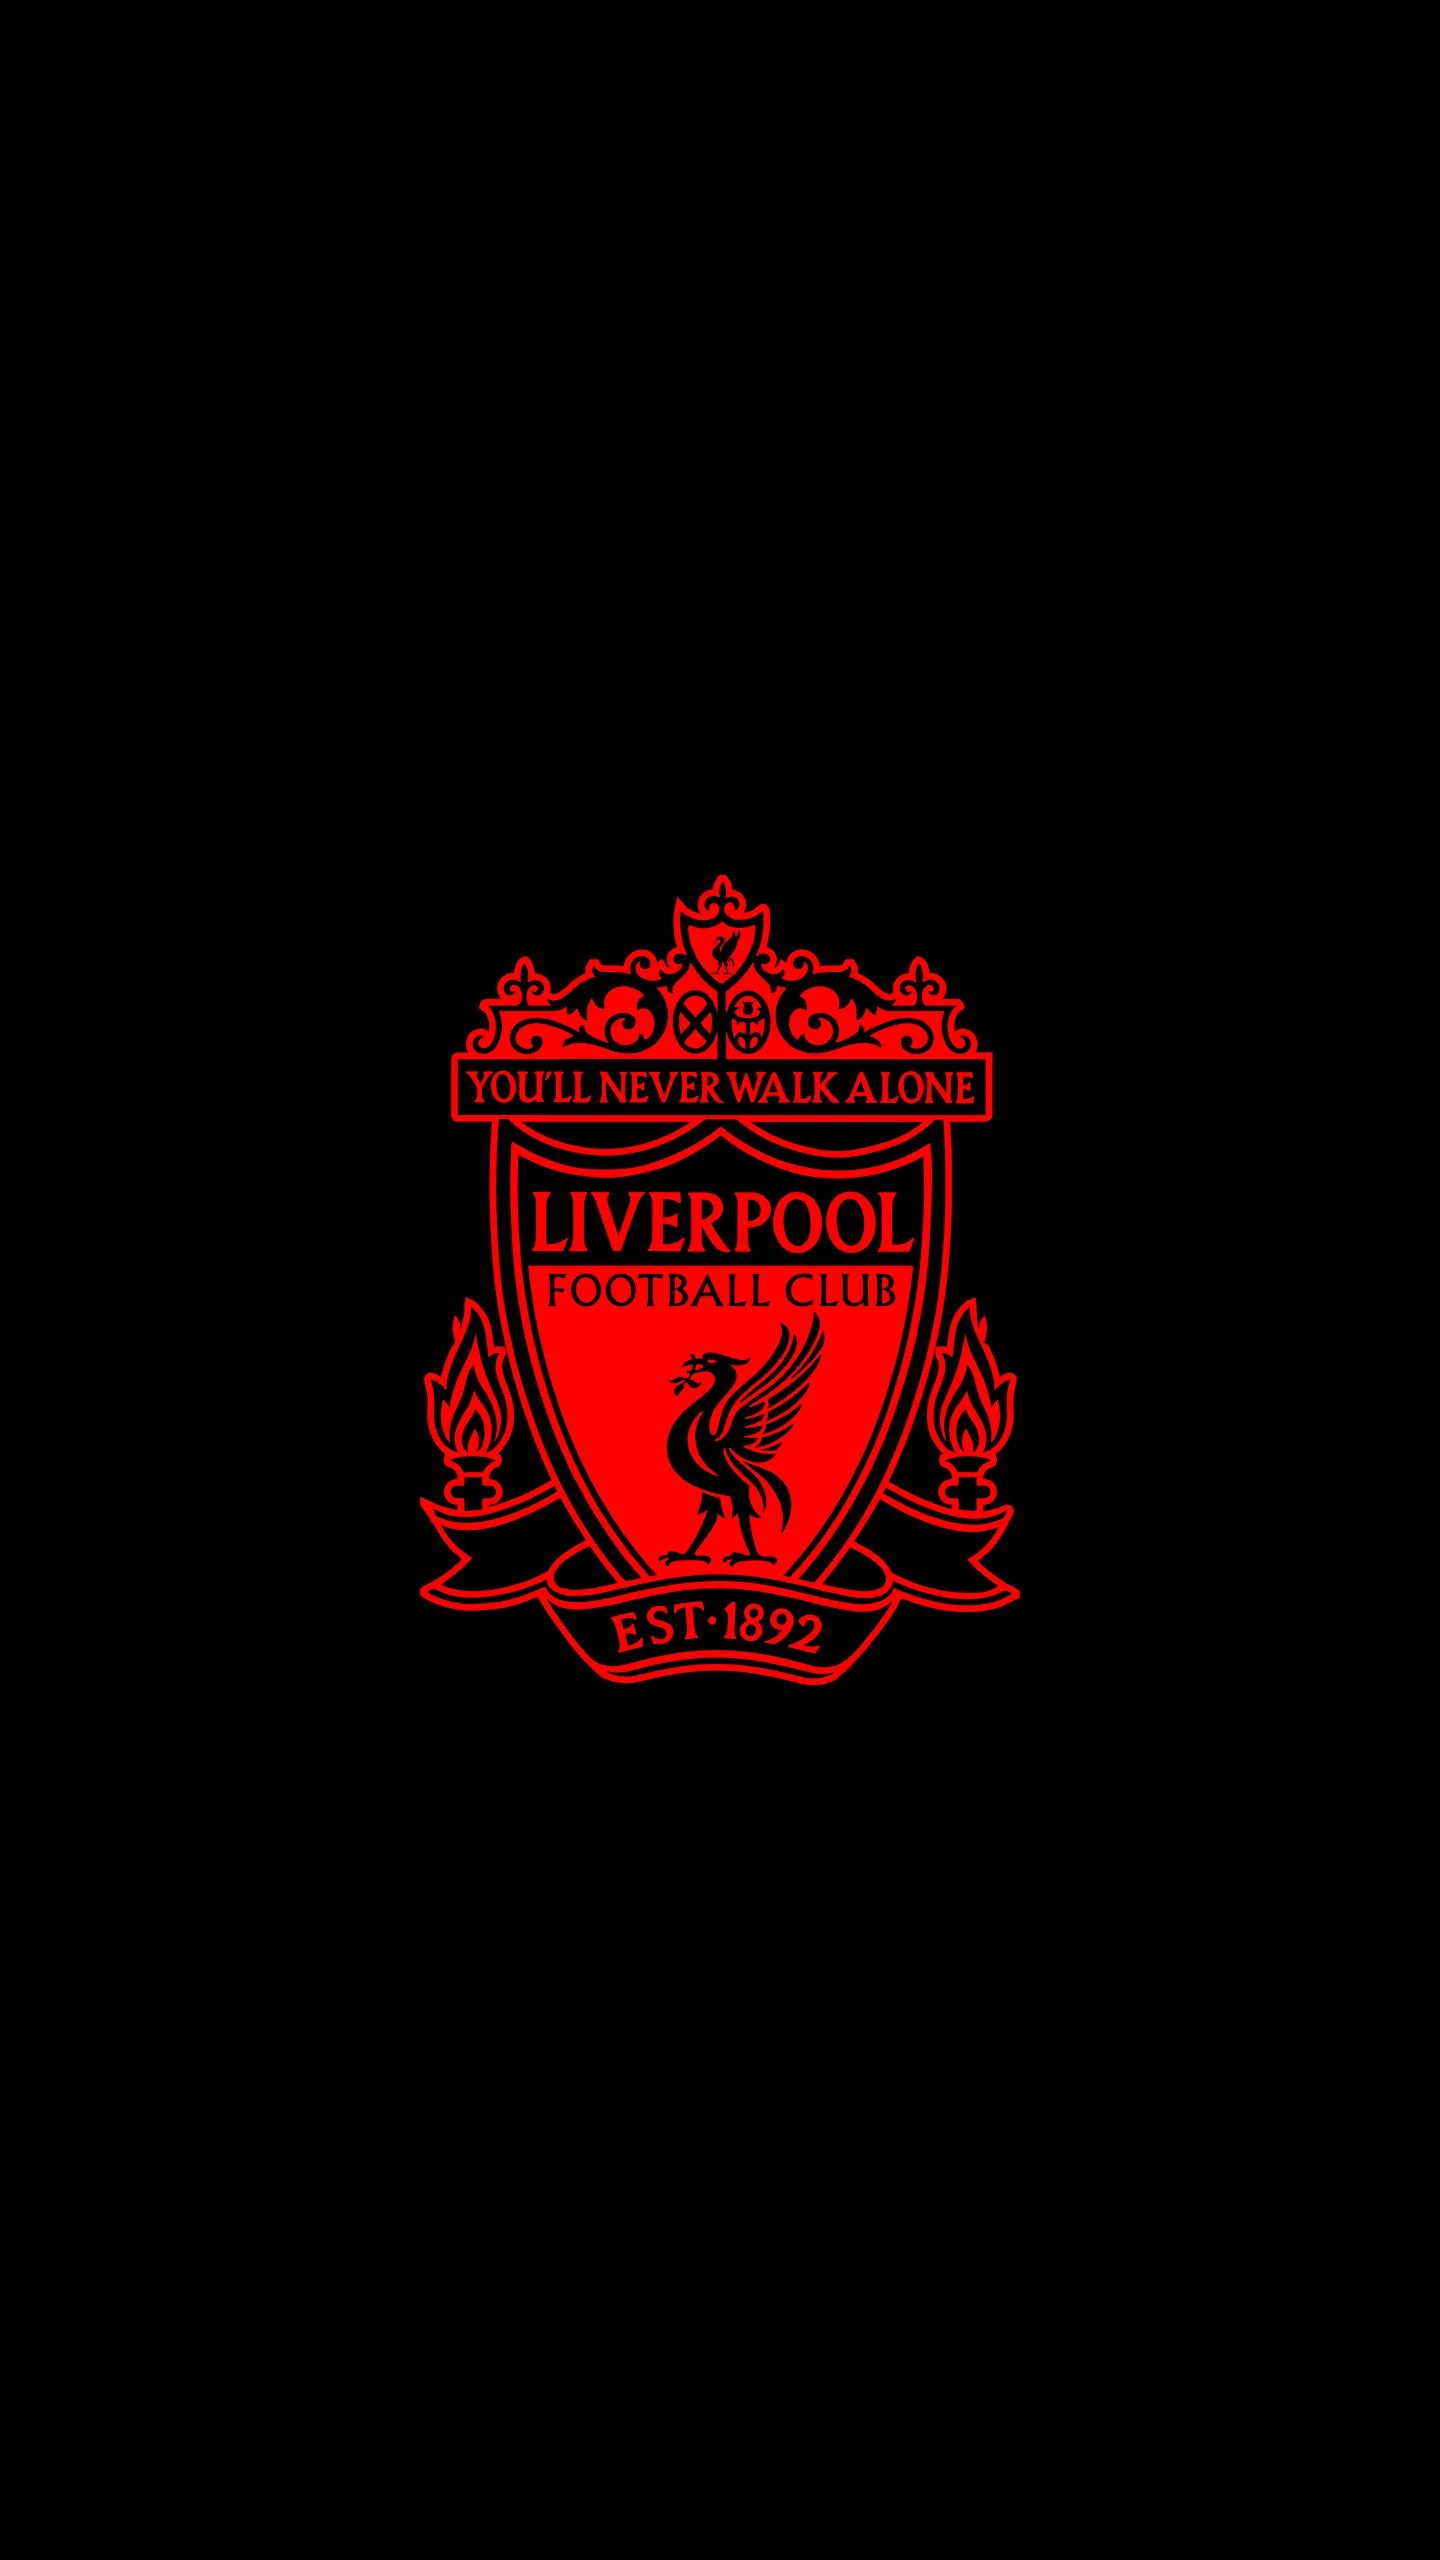 Liverpool Football Club: The first official logo was designed by John Houlding and introduced when LFC was founded in 1892. 1440x2560 HD Background.